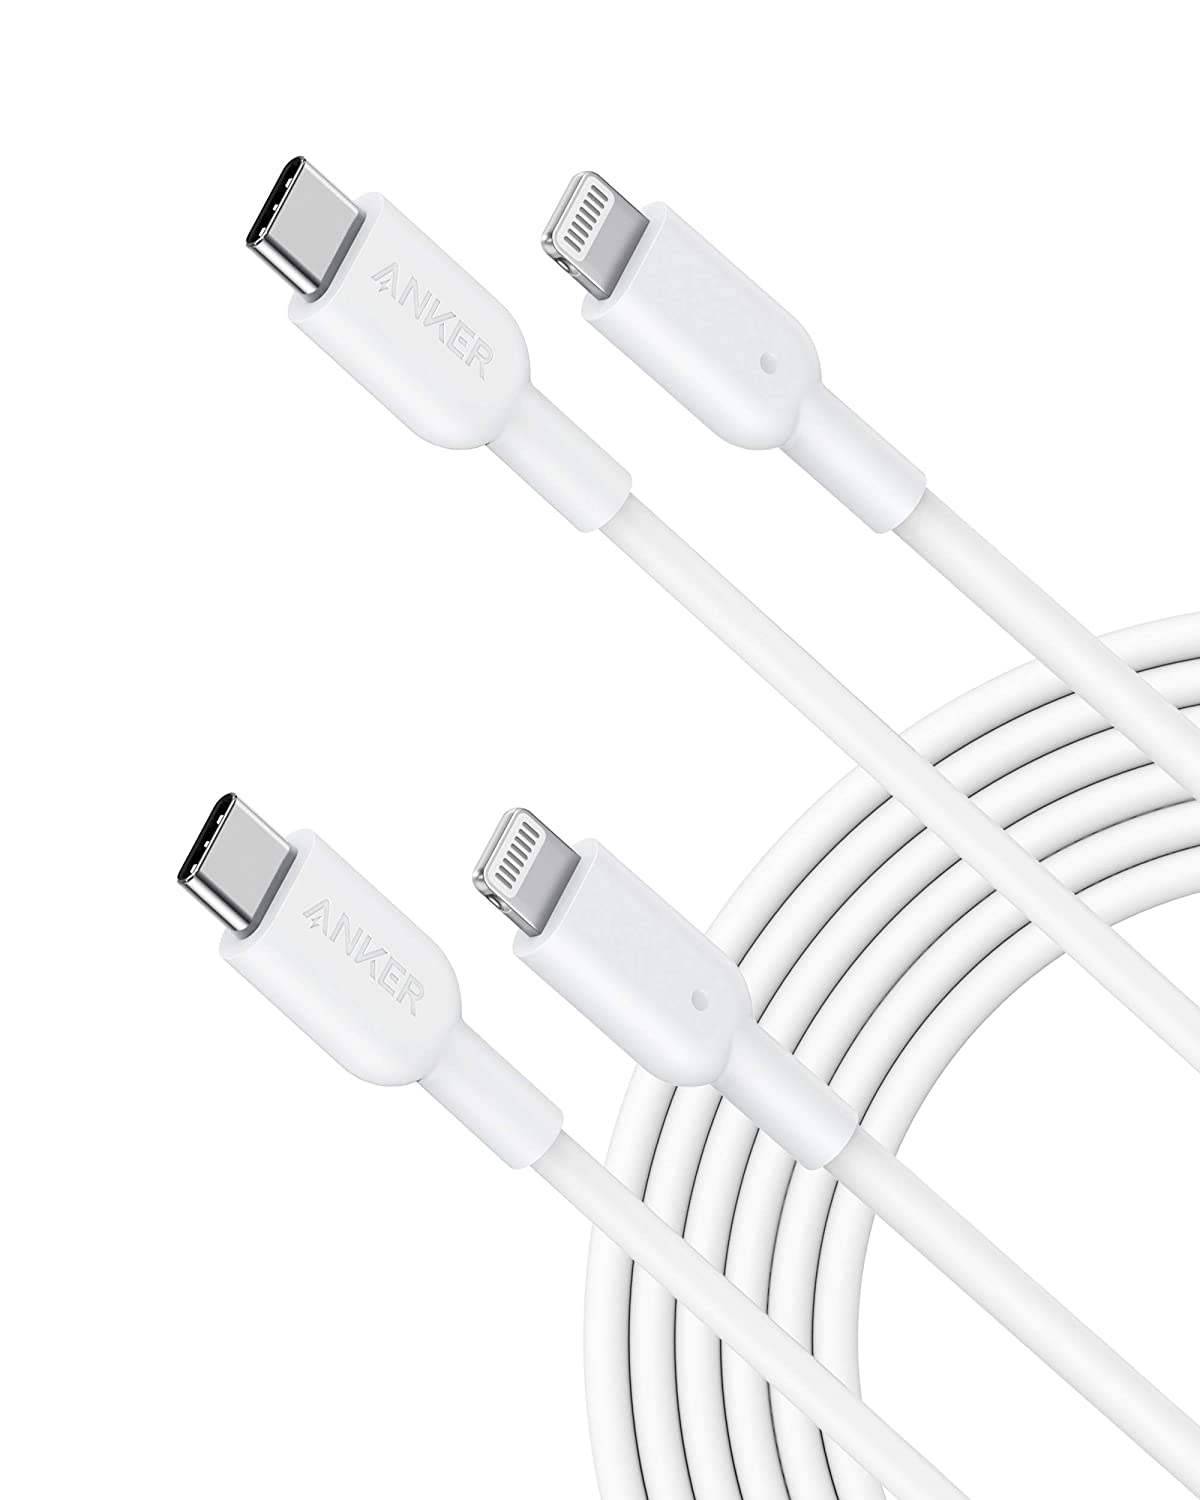 Anker USB C to Lightning Cable, Powerline II [10ft, 2-Pack, MFi Certified]